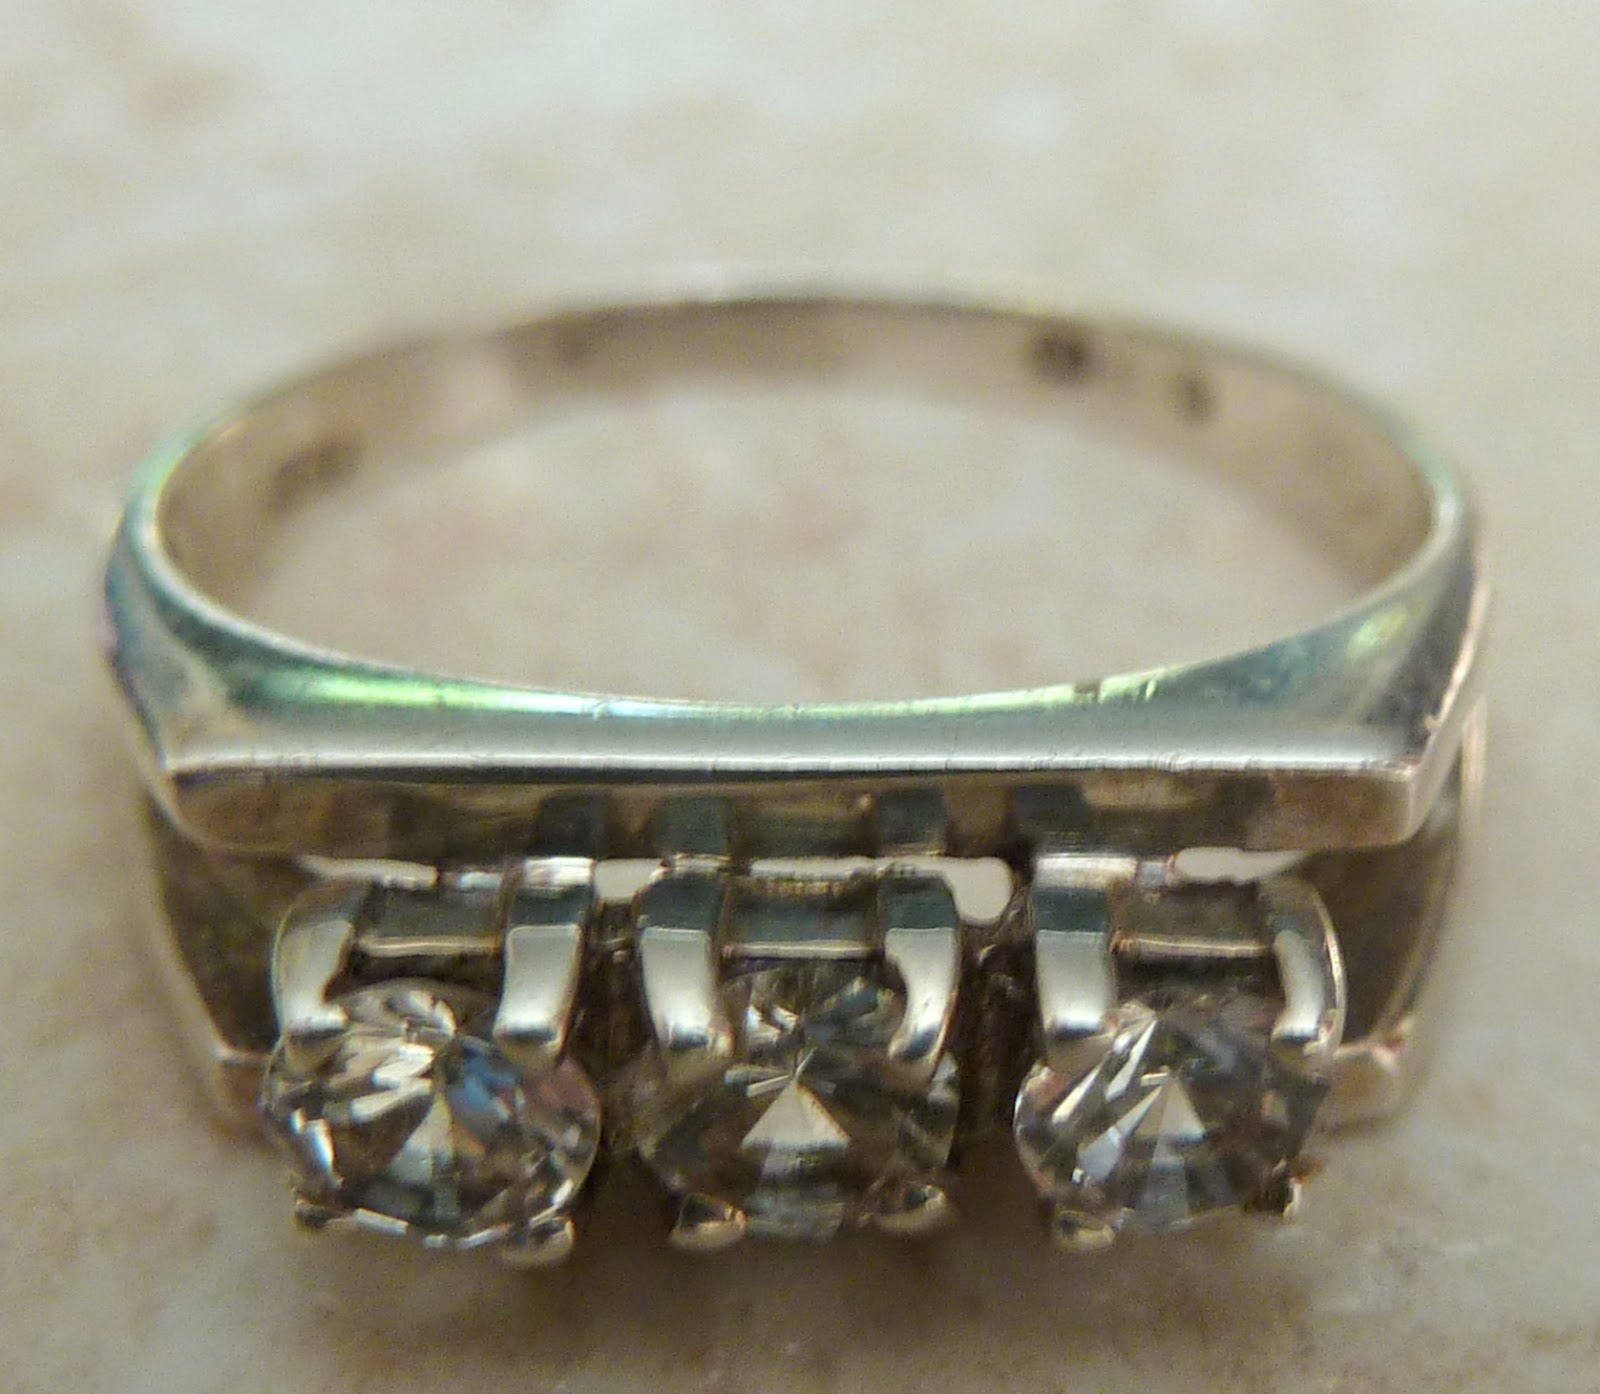 http://www.kcavintagegems.uk/vintage-sterling-silver-and-zirconia-modernist-style-ring-360-p.asp